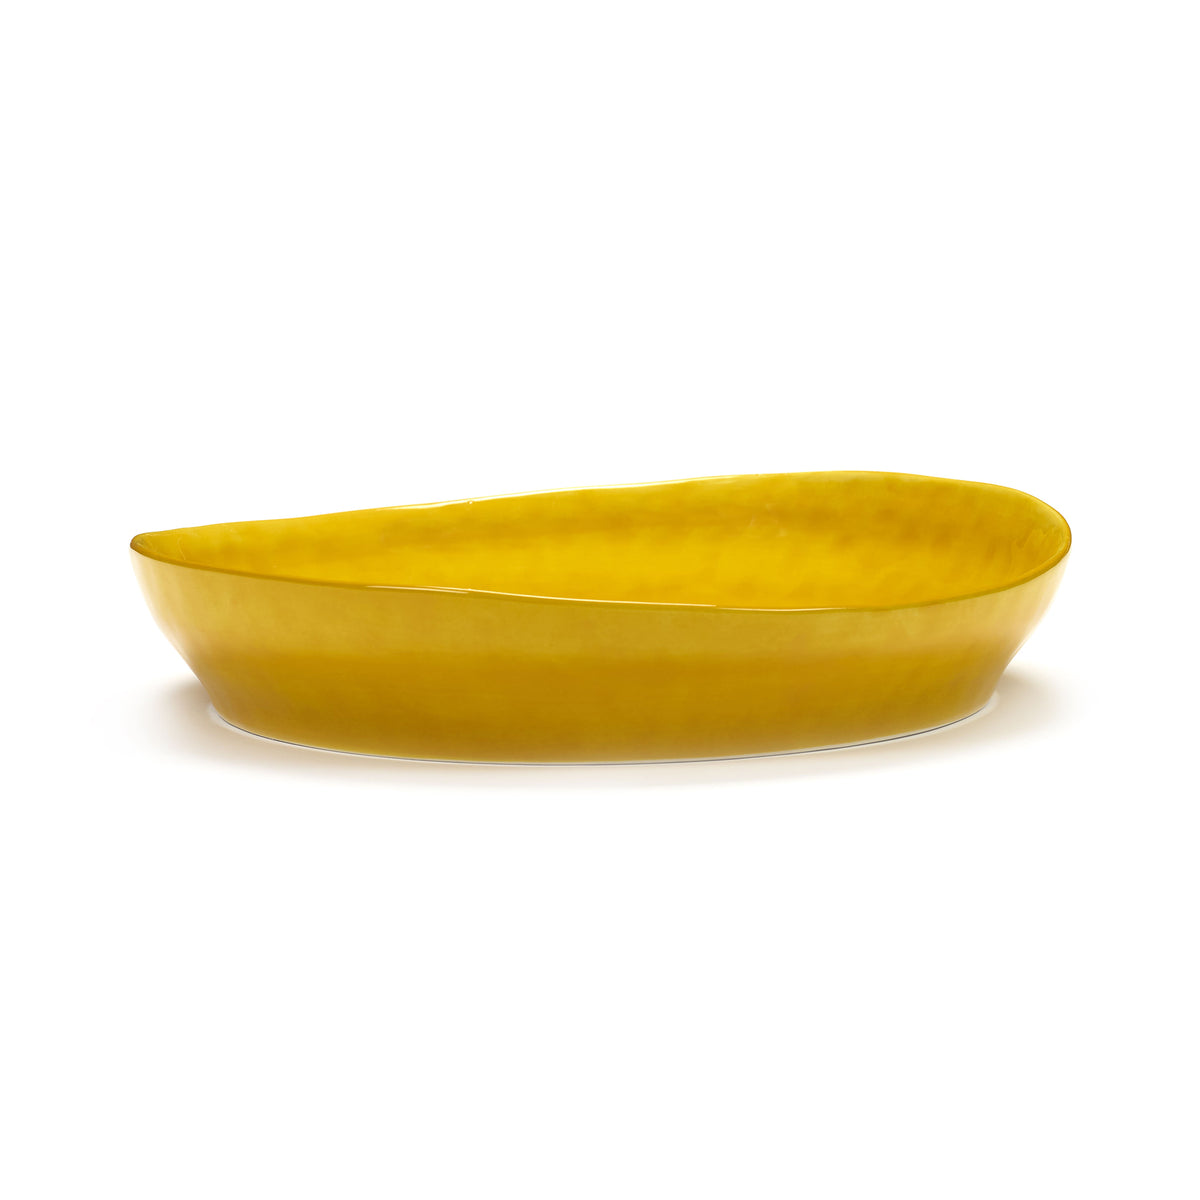 Sunny Yellow High Side Serving Plate with Black Dots